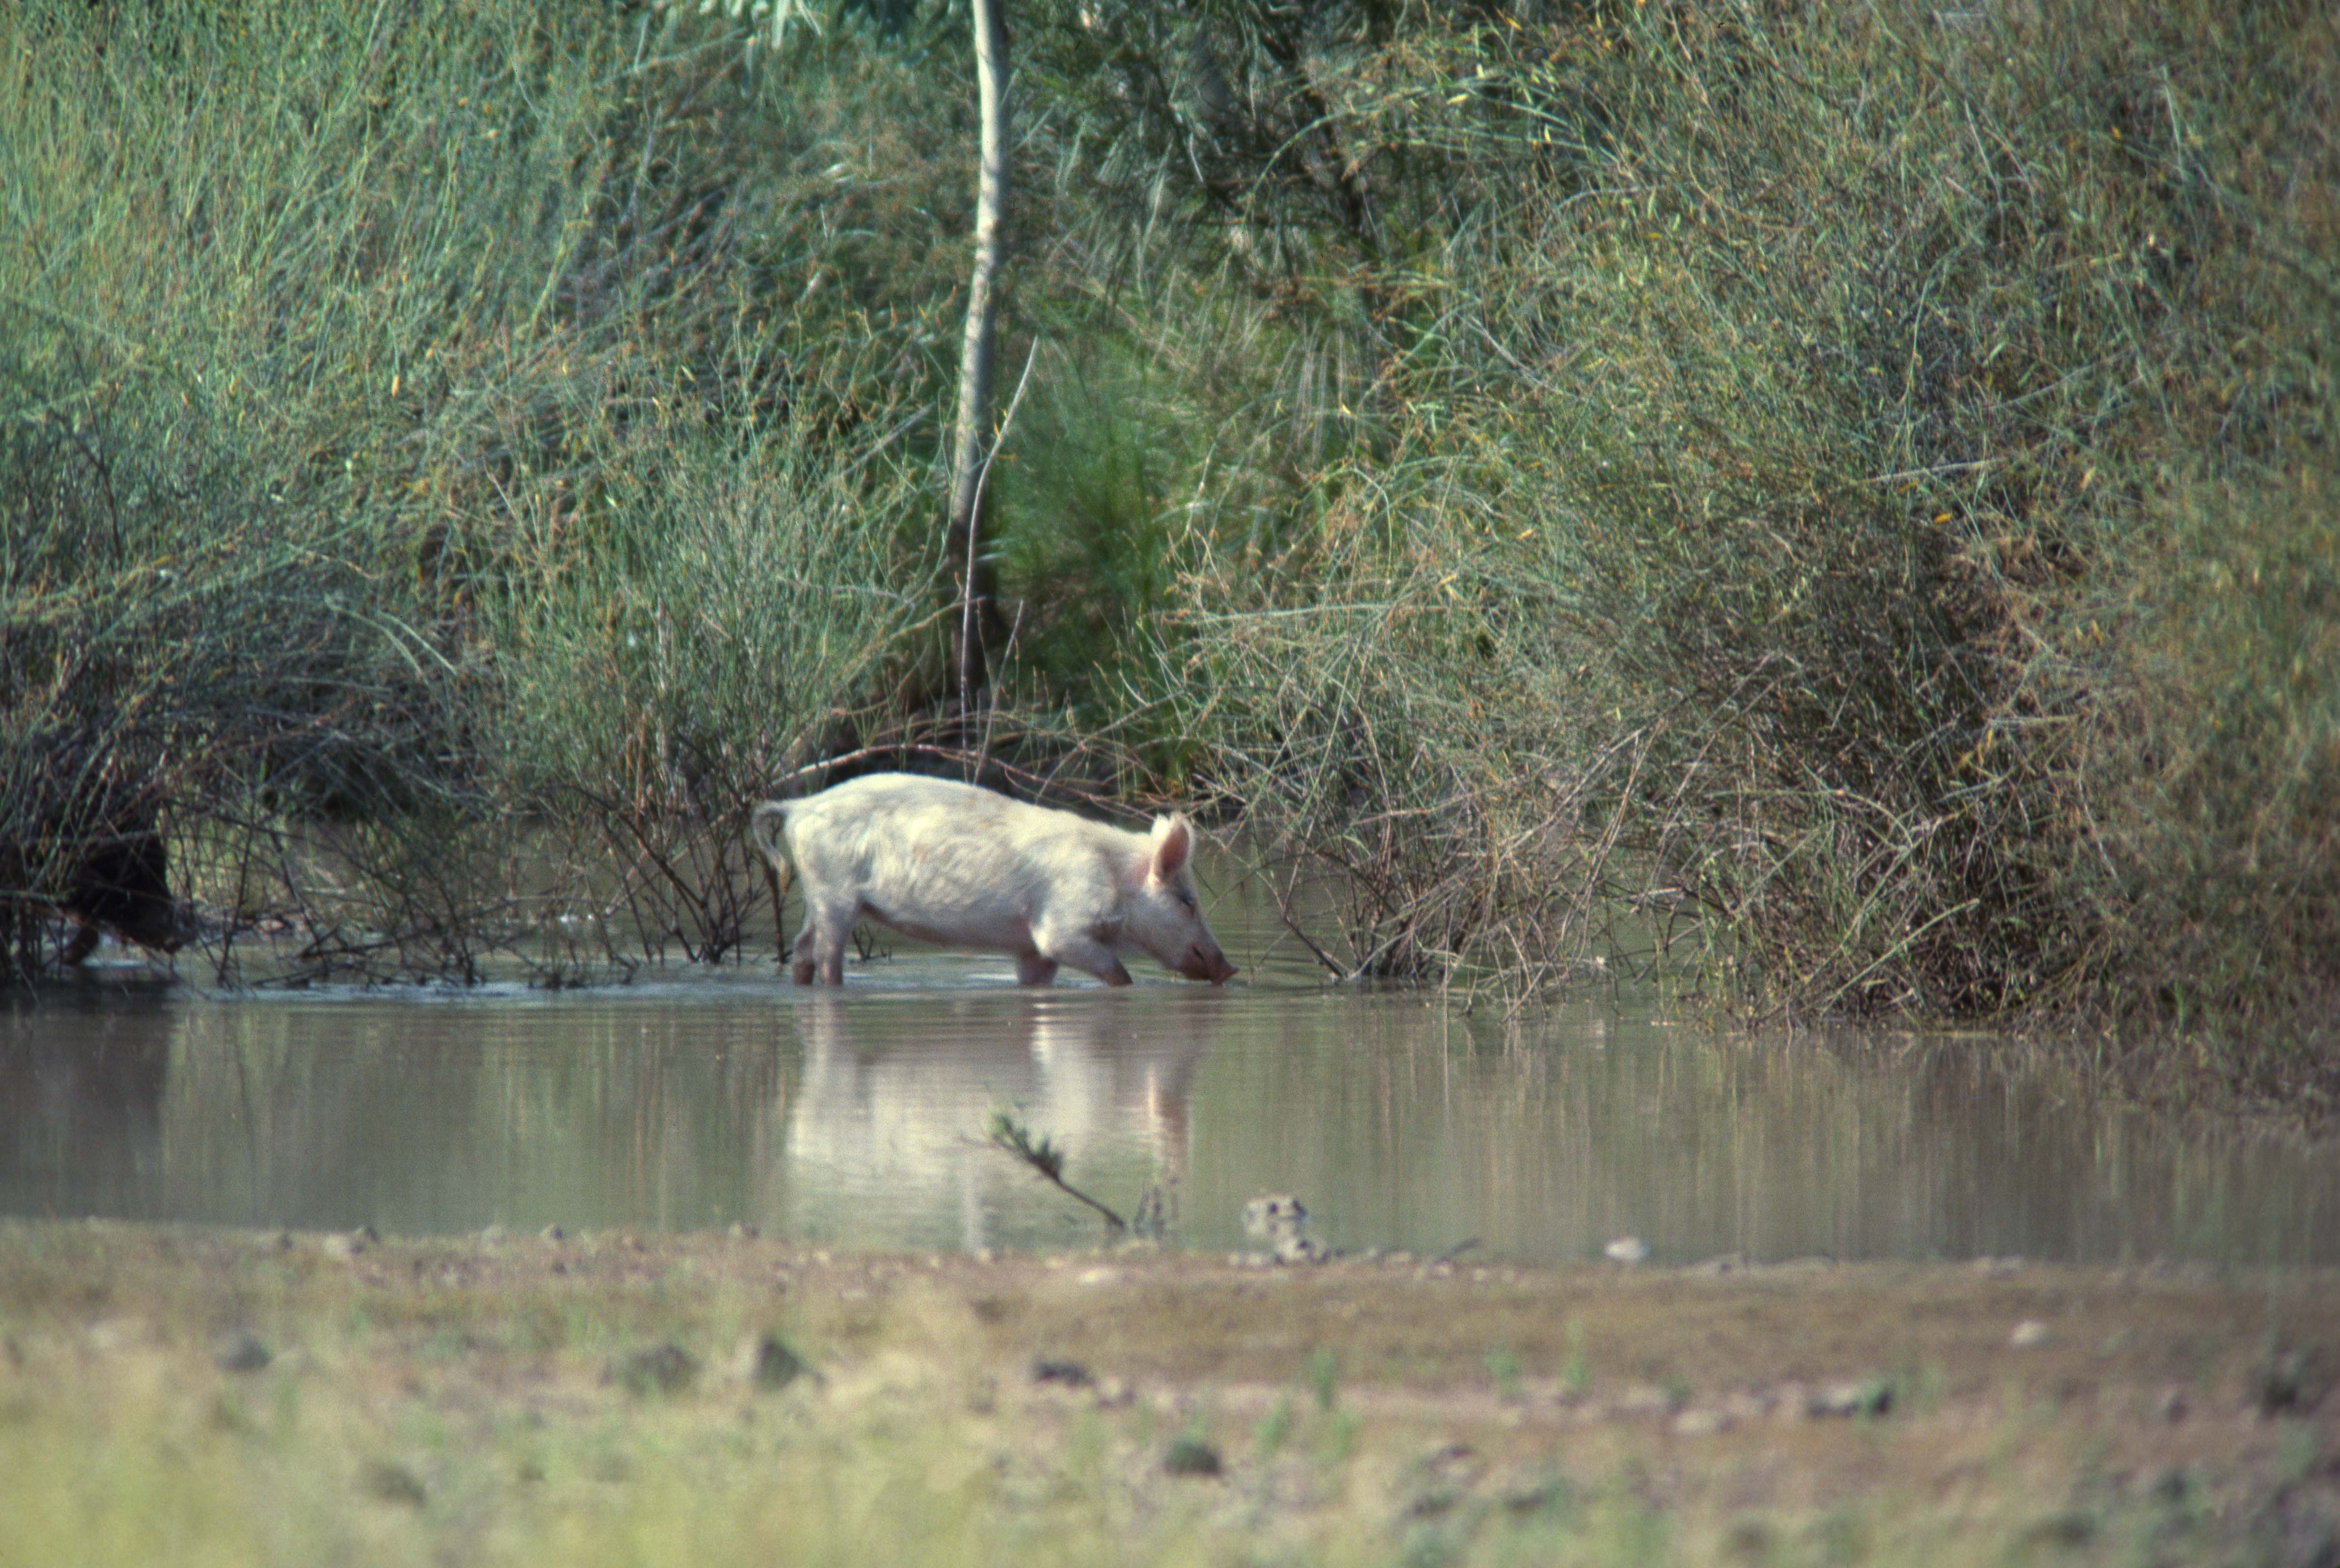 Feral pig traveling through a waterbody. Photo by Department of Environment and Resource Management - Queensland Government